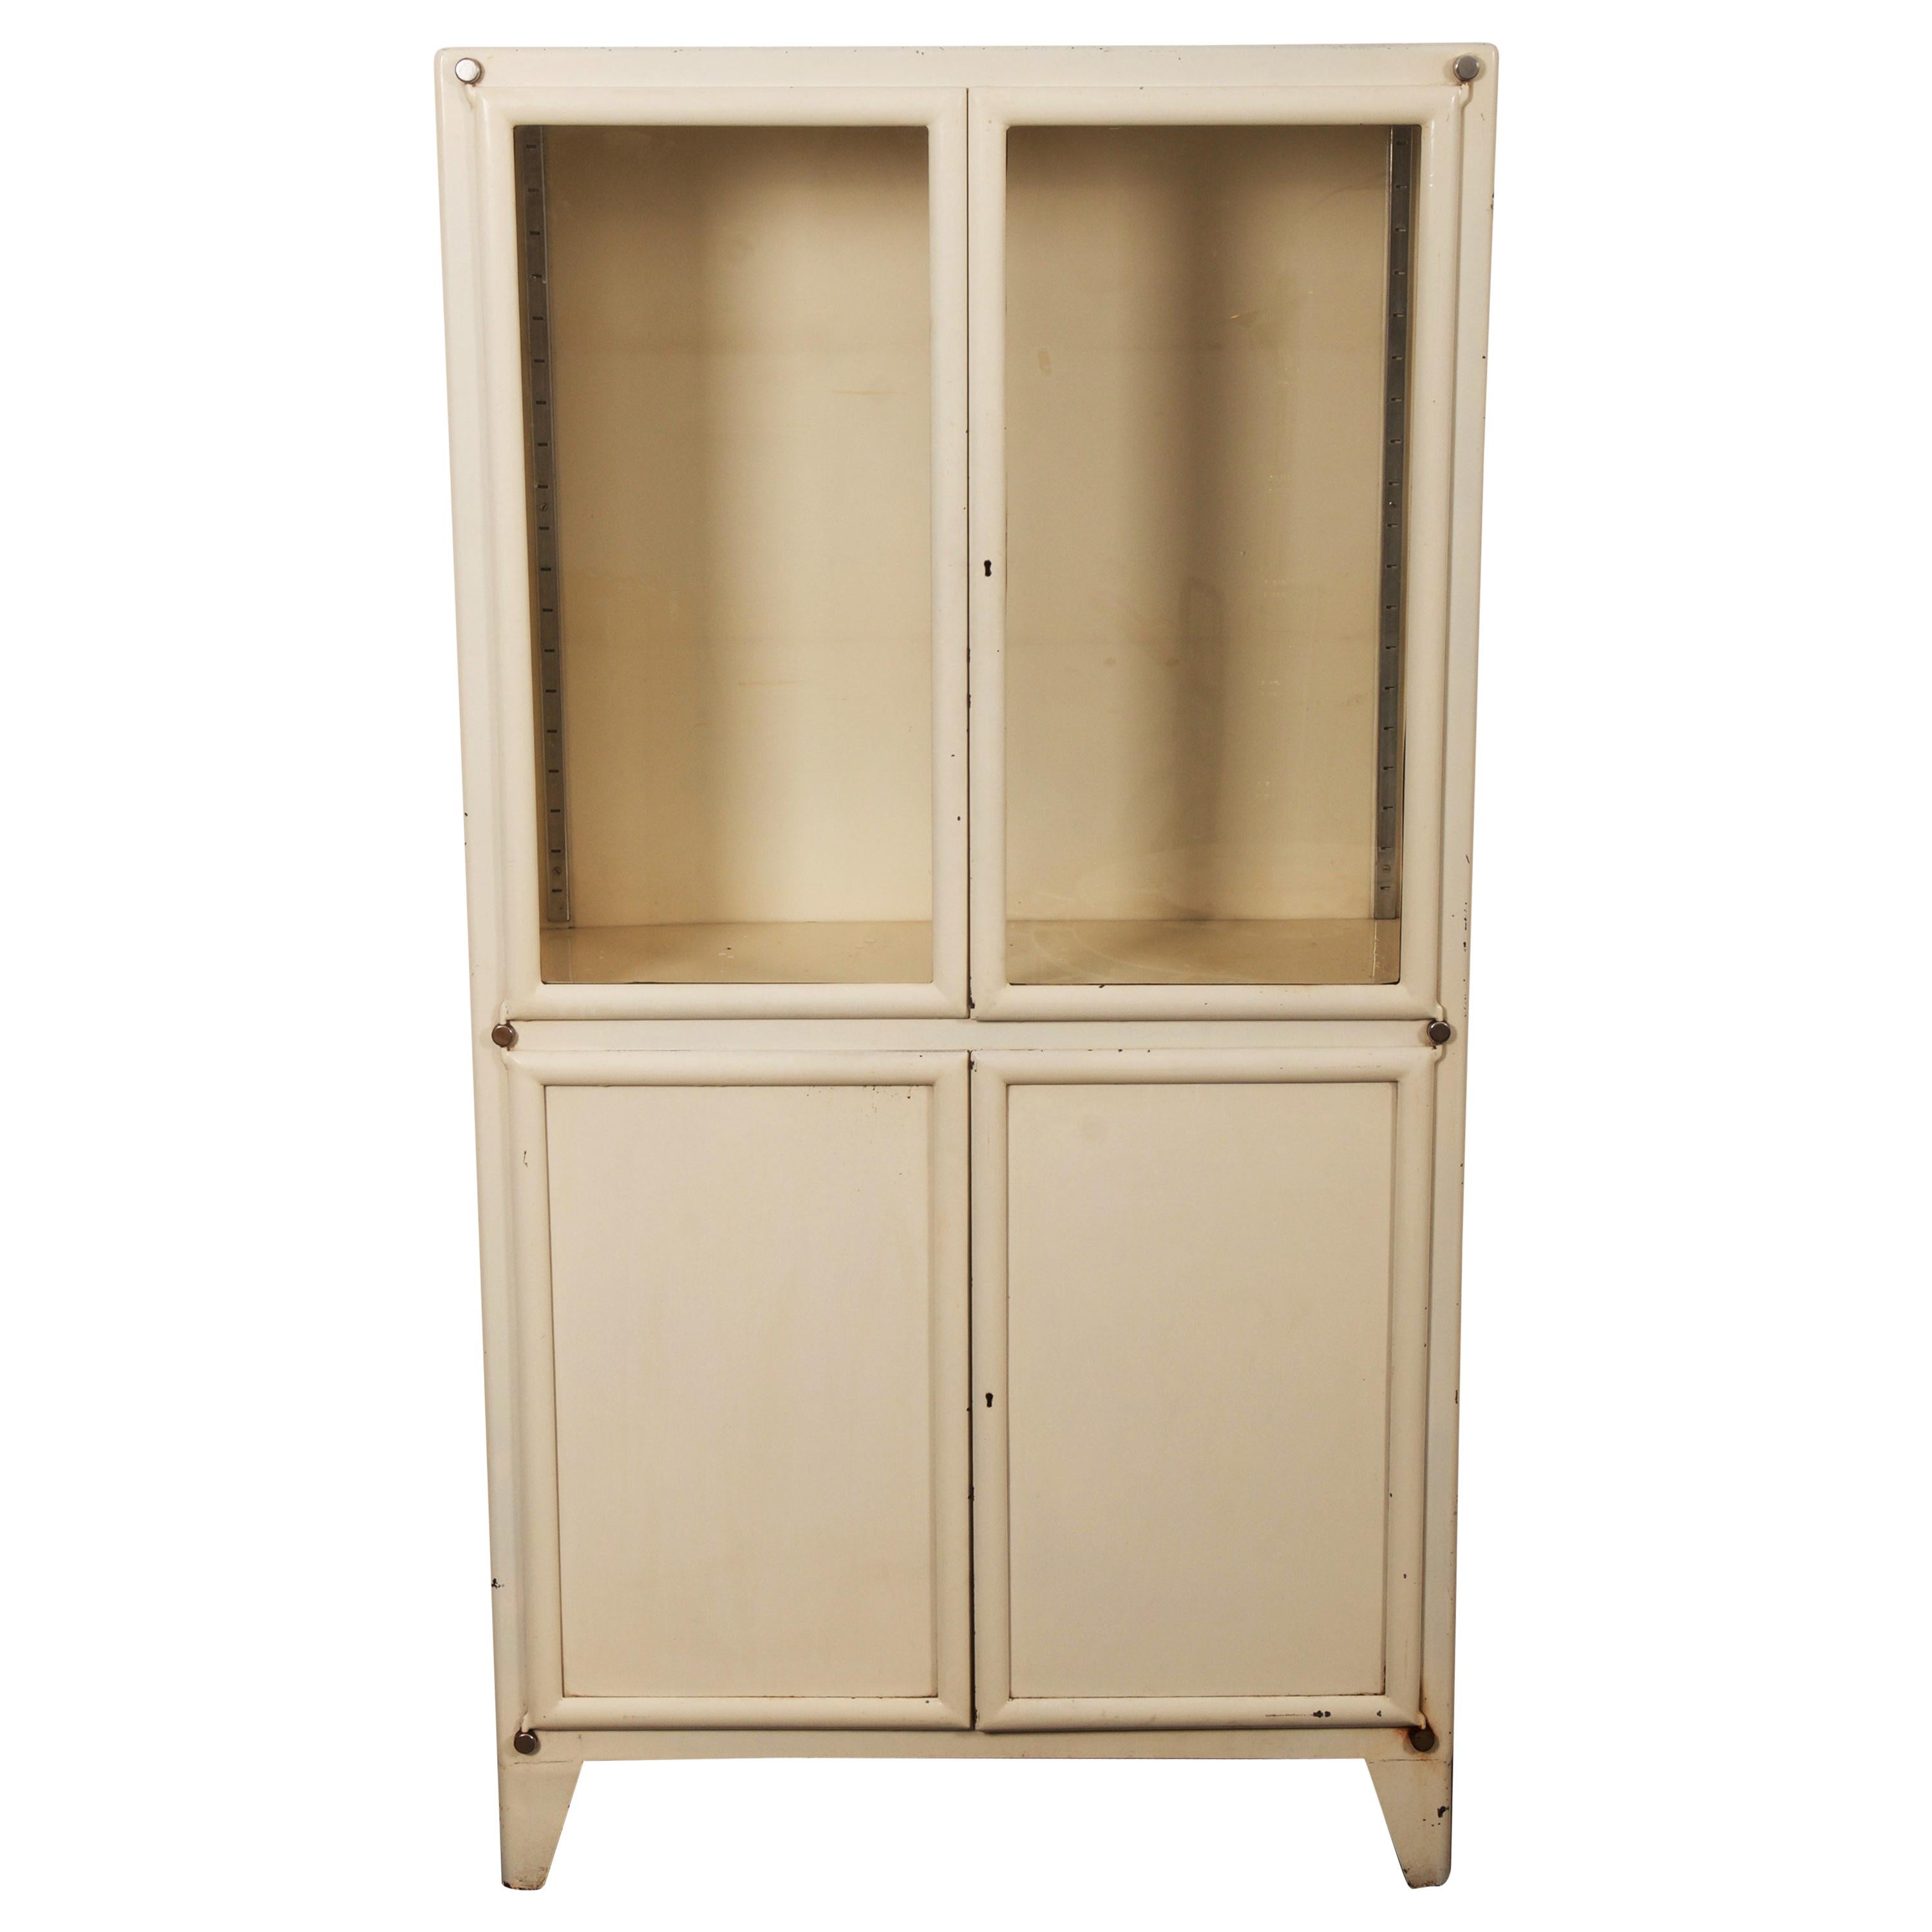 Iron Medical Cabinet By Kovona For Sale